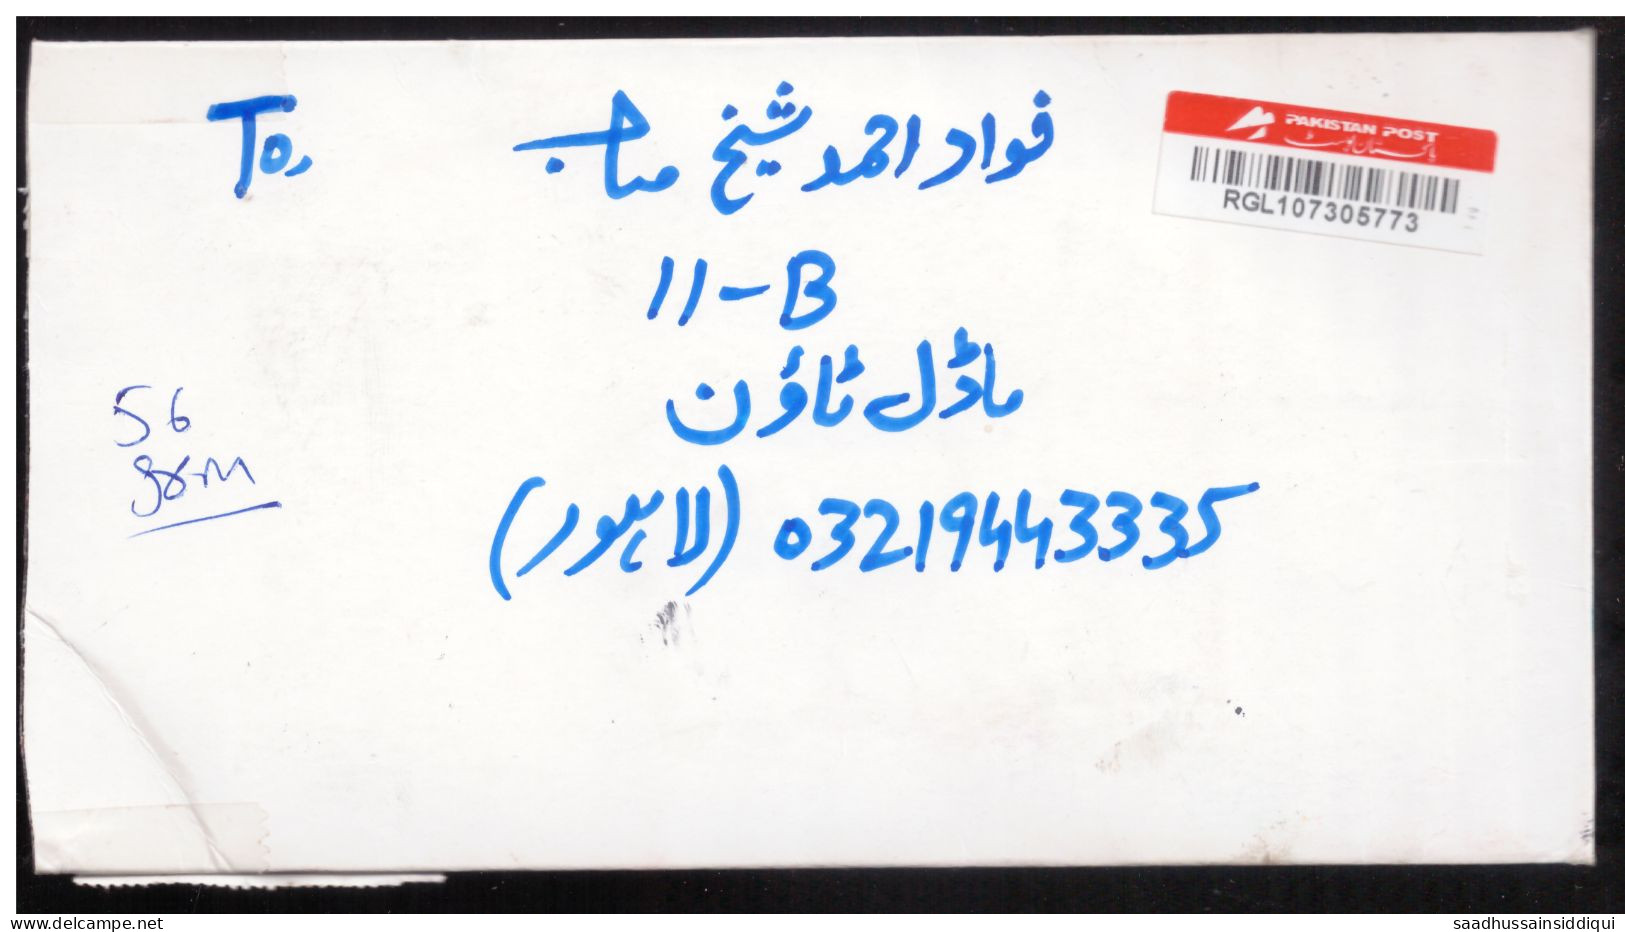 USED REGISTERED AIR MAIL DOMESTIC COVER PAKISTAN ( 6 ) - Pakistan